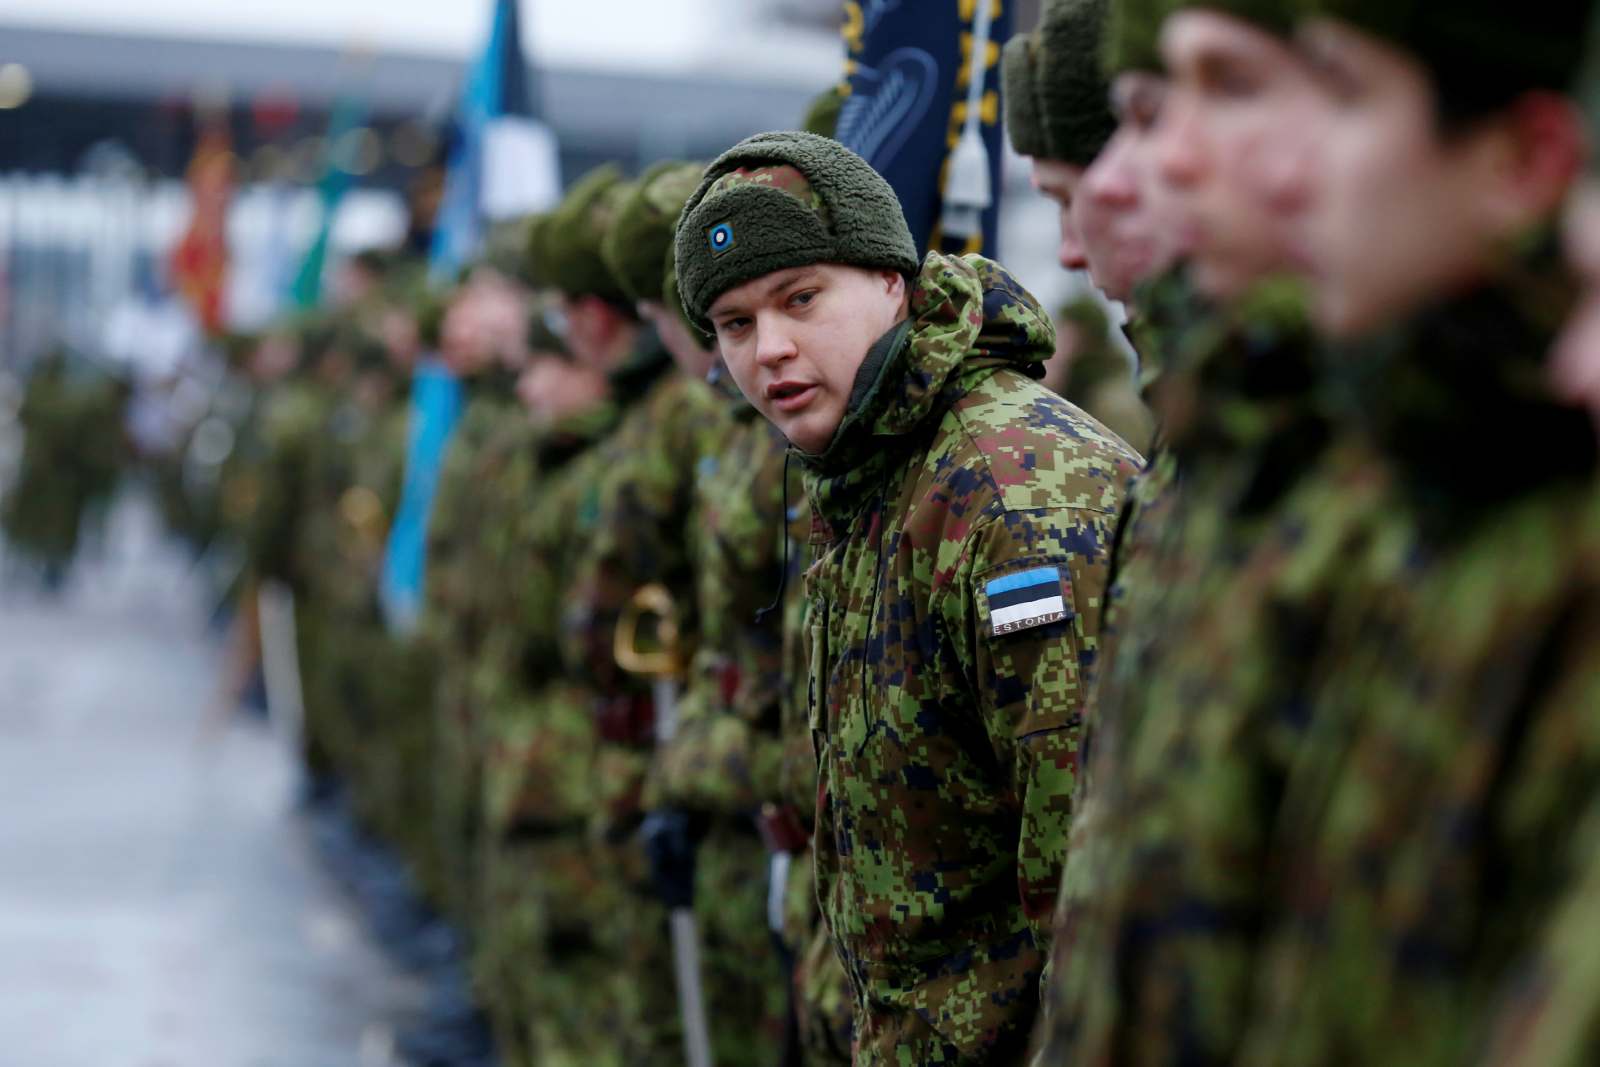 Estonian soldiers get ready for the commemoration of the centennial of the War of Independence ceasefire near the border crossing point with Russia in Narva, Estonia January 3, 2020.